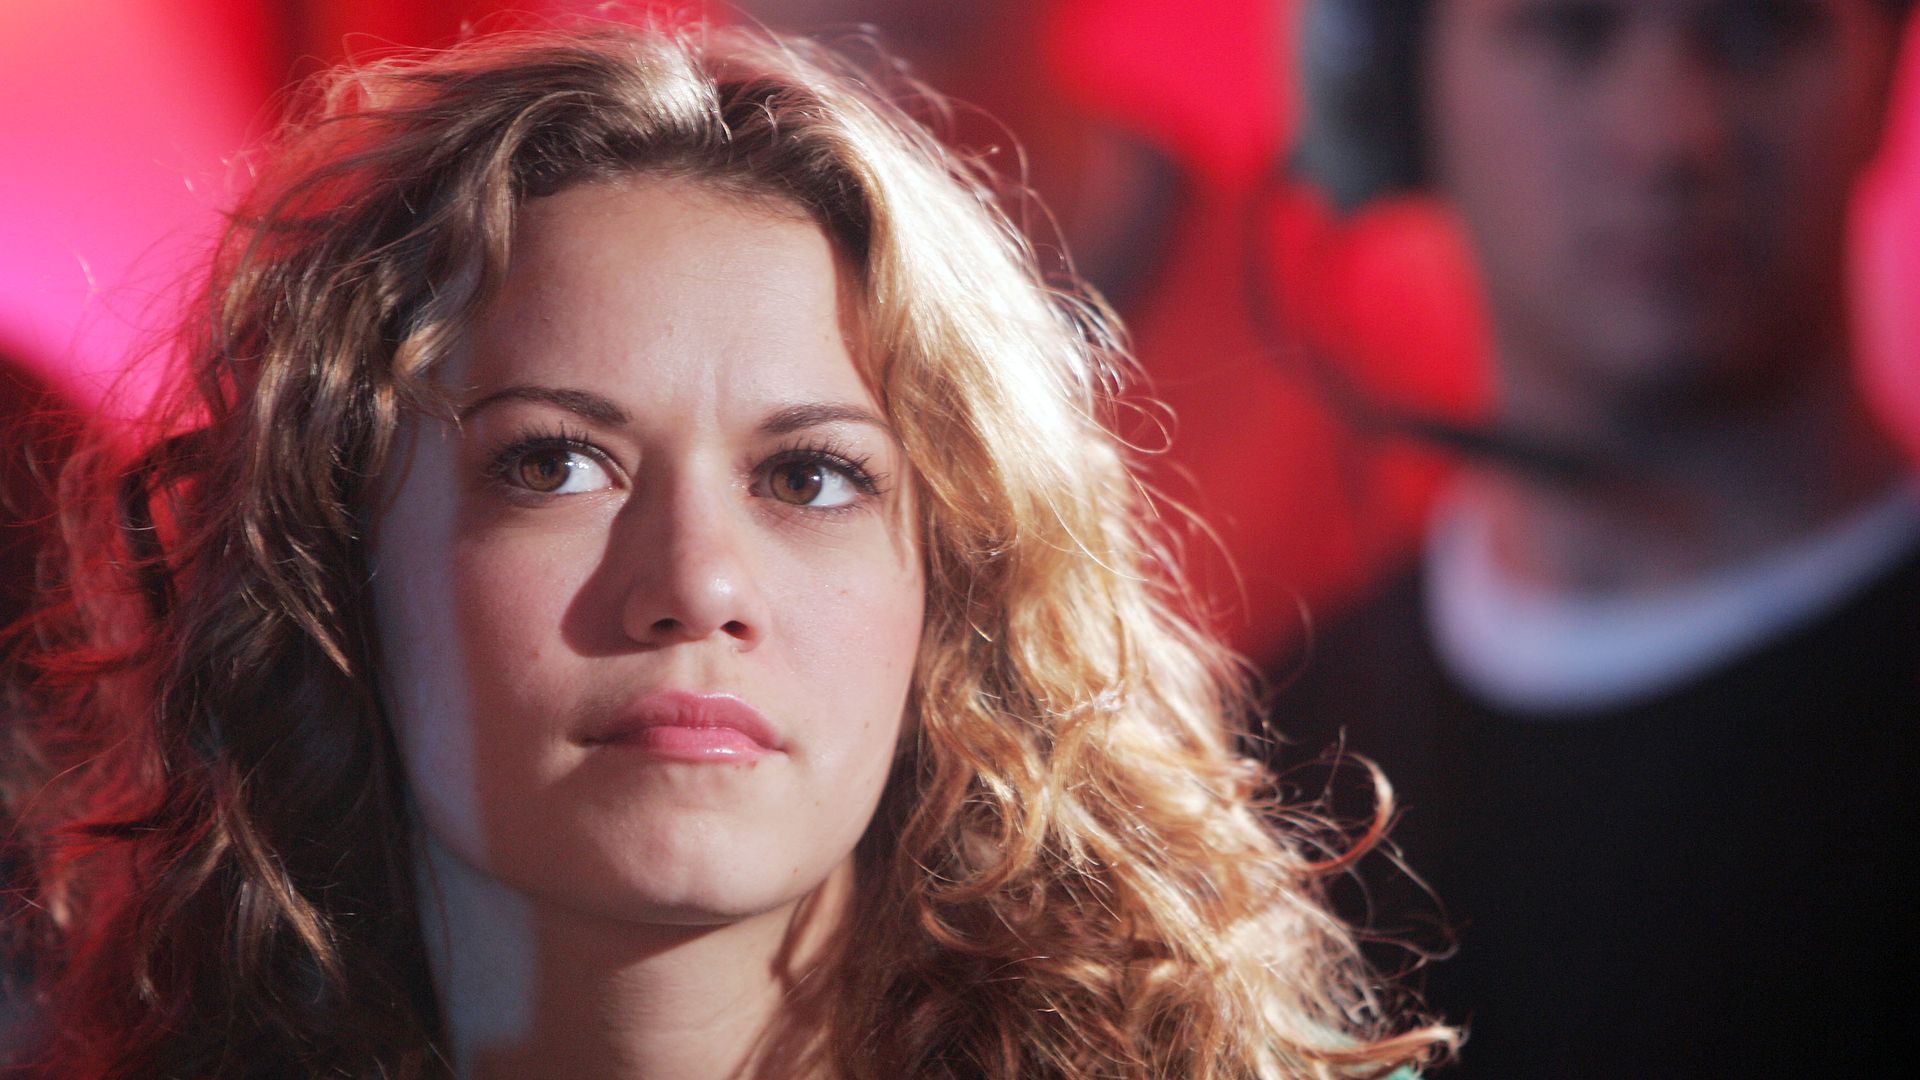 Actress Bethany Joy Lenz appears on stage during MTV's Total Request Live at the MTV Times Square Studios November 1, 2004 